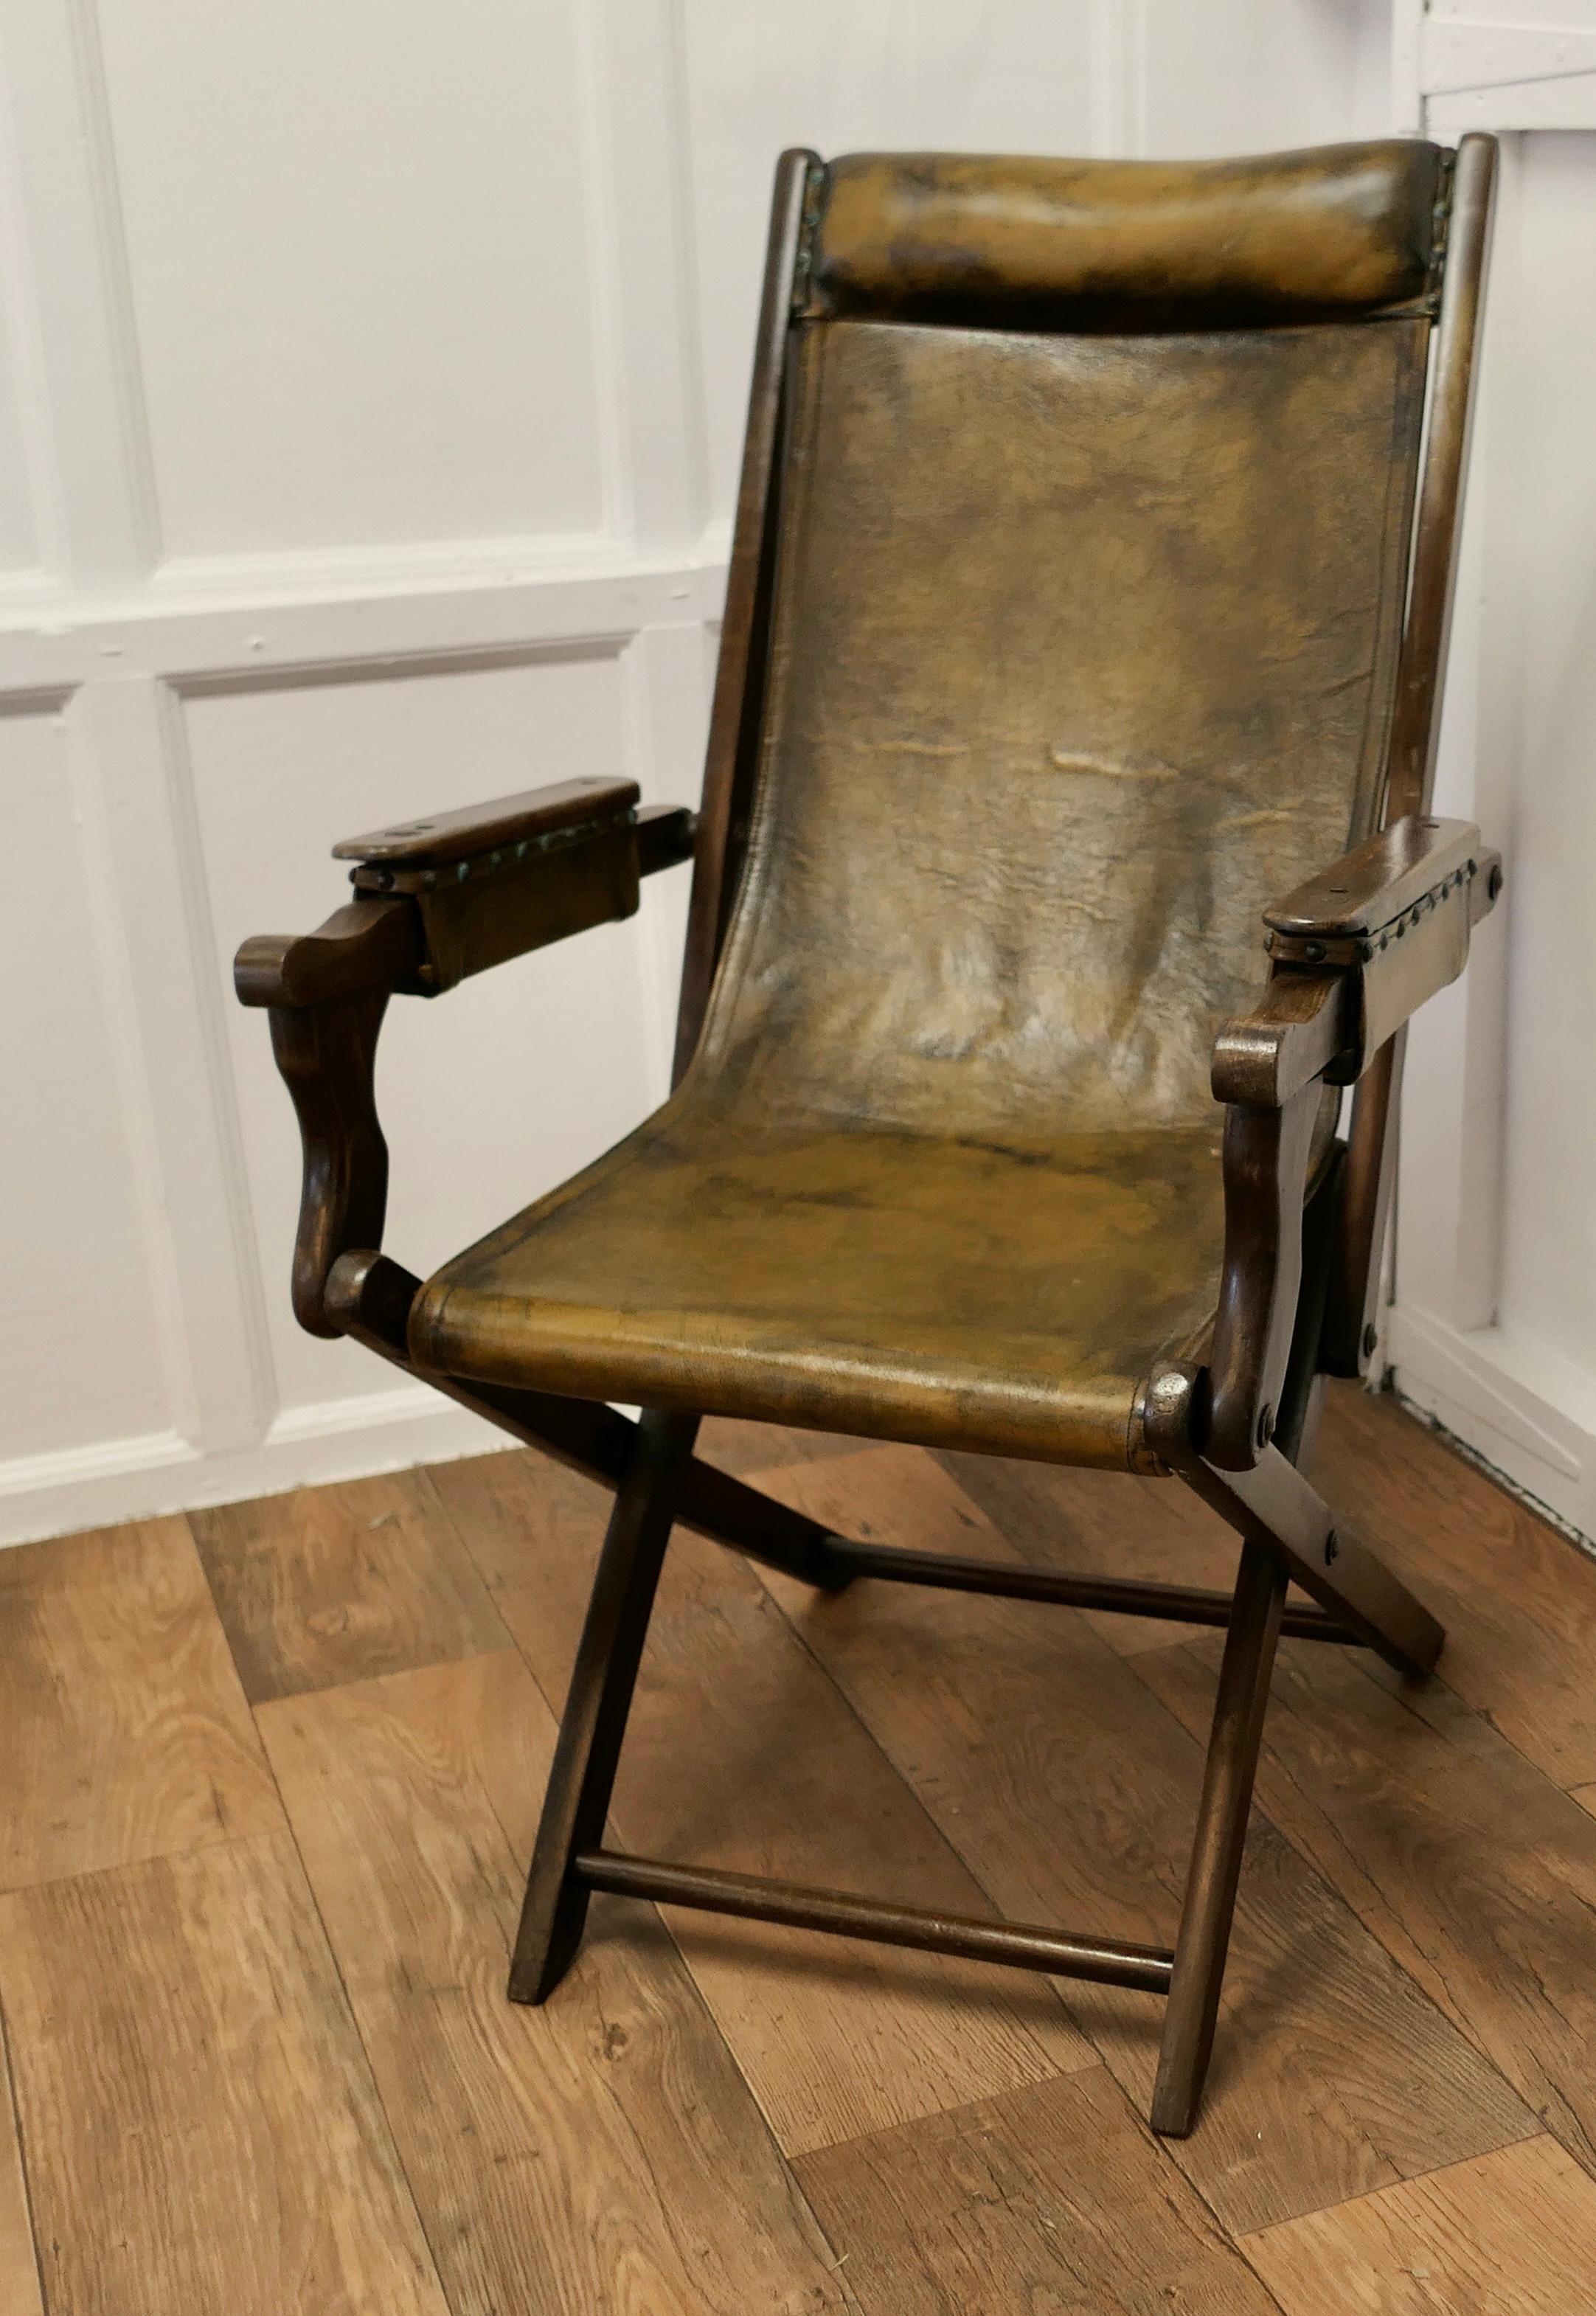 Edwardian Steamer Chair, Folding Leather Deck Chair


Edwardian Steamer Chair or Folding Campaign Deck Chair, the chair is made in beech and is upholstered with Olive green leather 
Dating from circa 1900 the upholstered folding frame has double